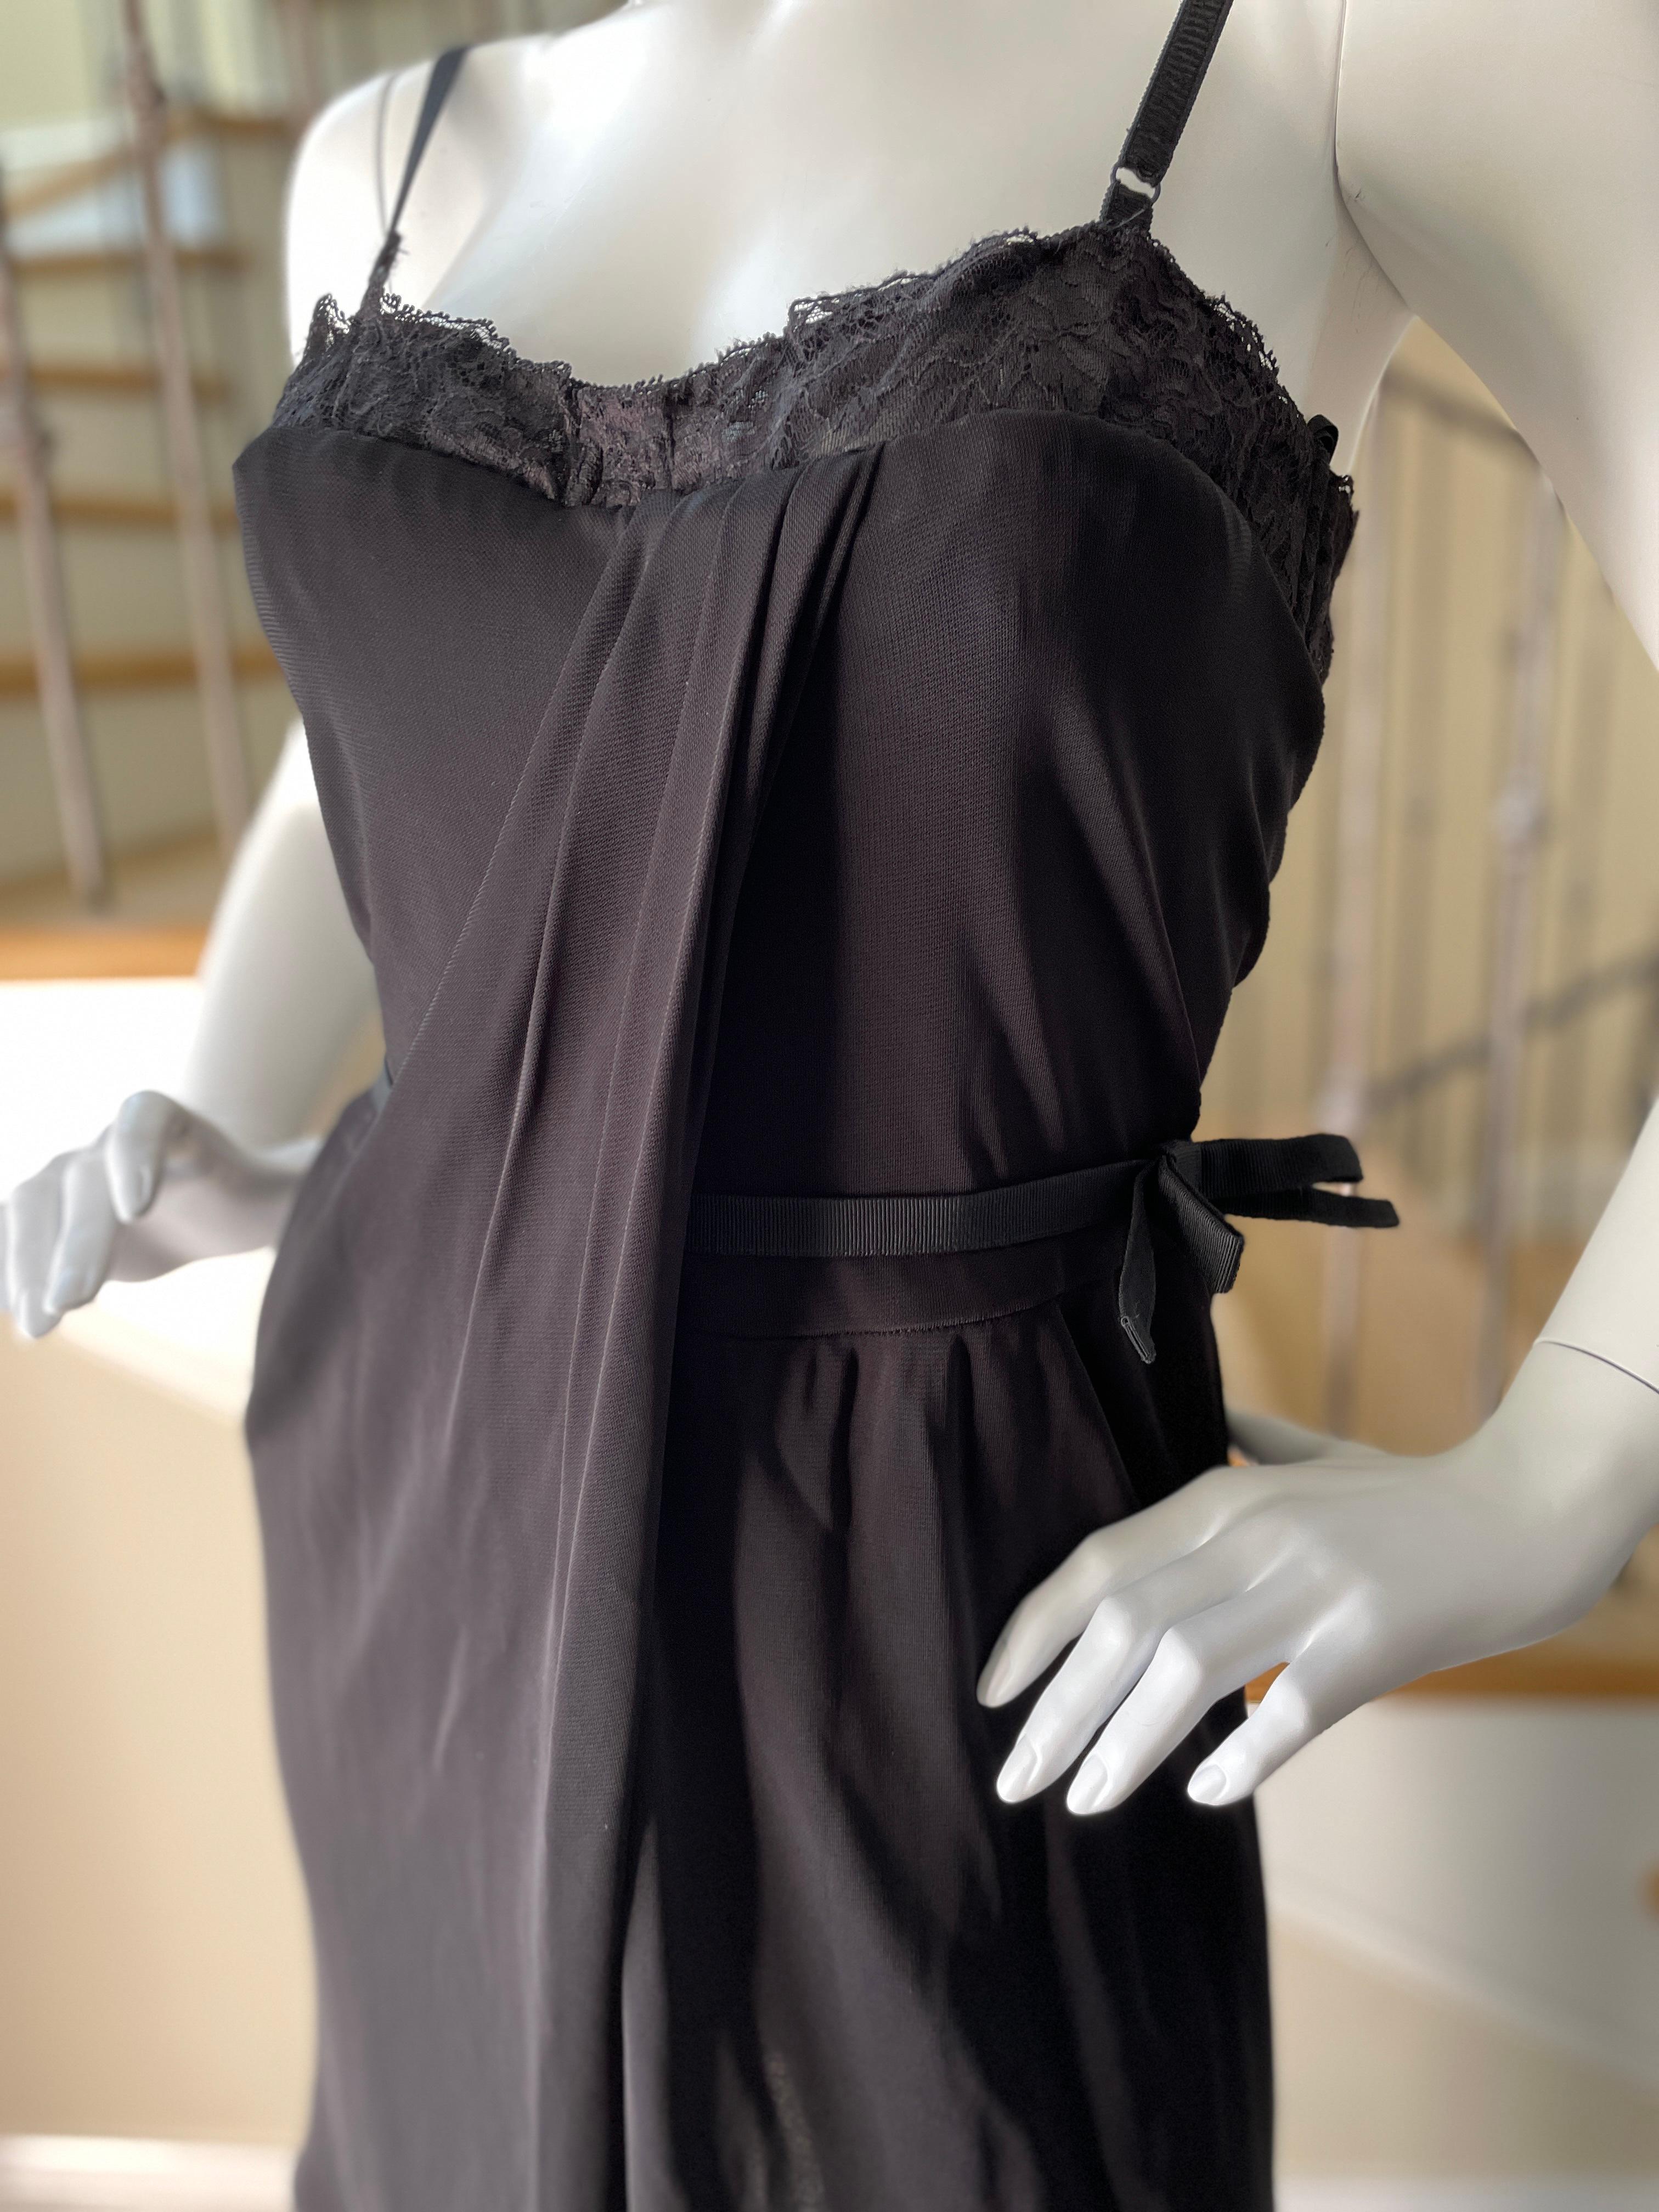 D&G by Dolce & Gabbana Vintage Black Cocktail Dress with Inner Corset NWT In New Condition For Sale In Cloverdale, CA